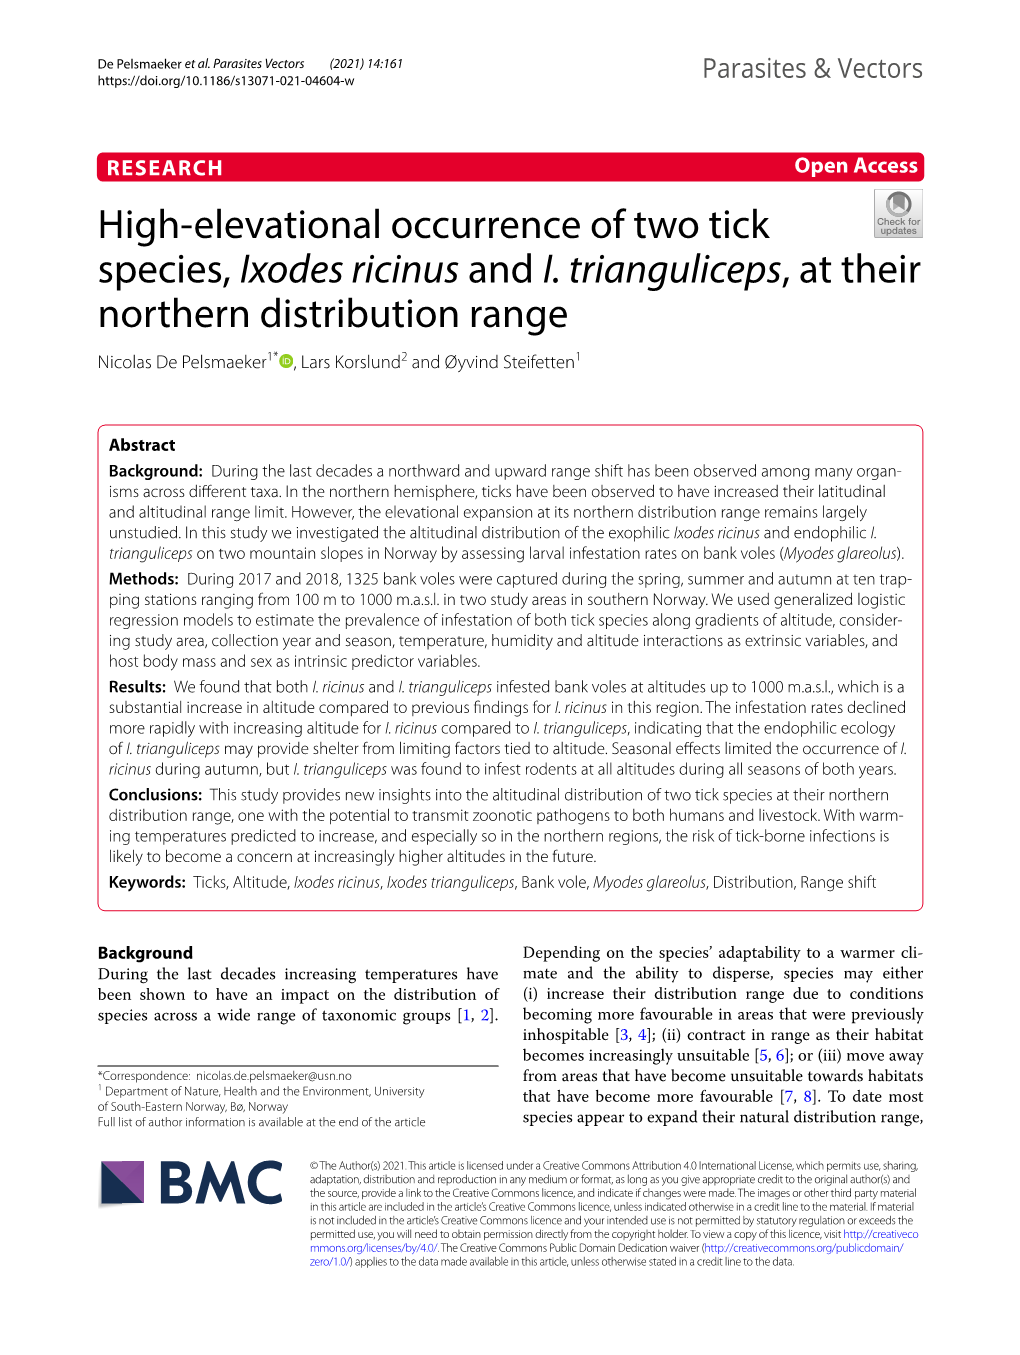 High-Elevational Occurrence of Two Tick Species, Ixodes Ricinus and I